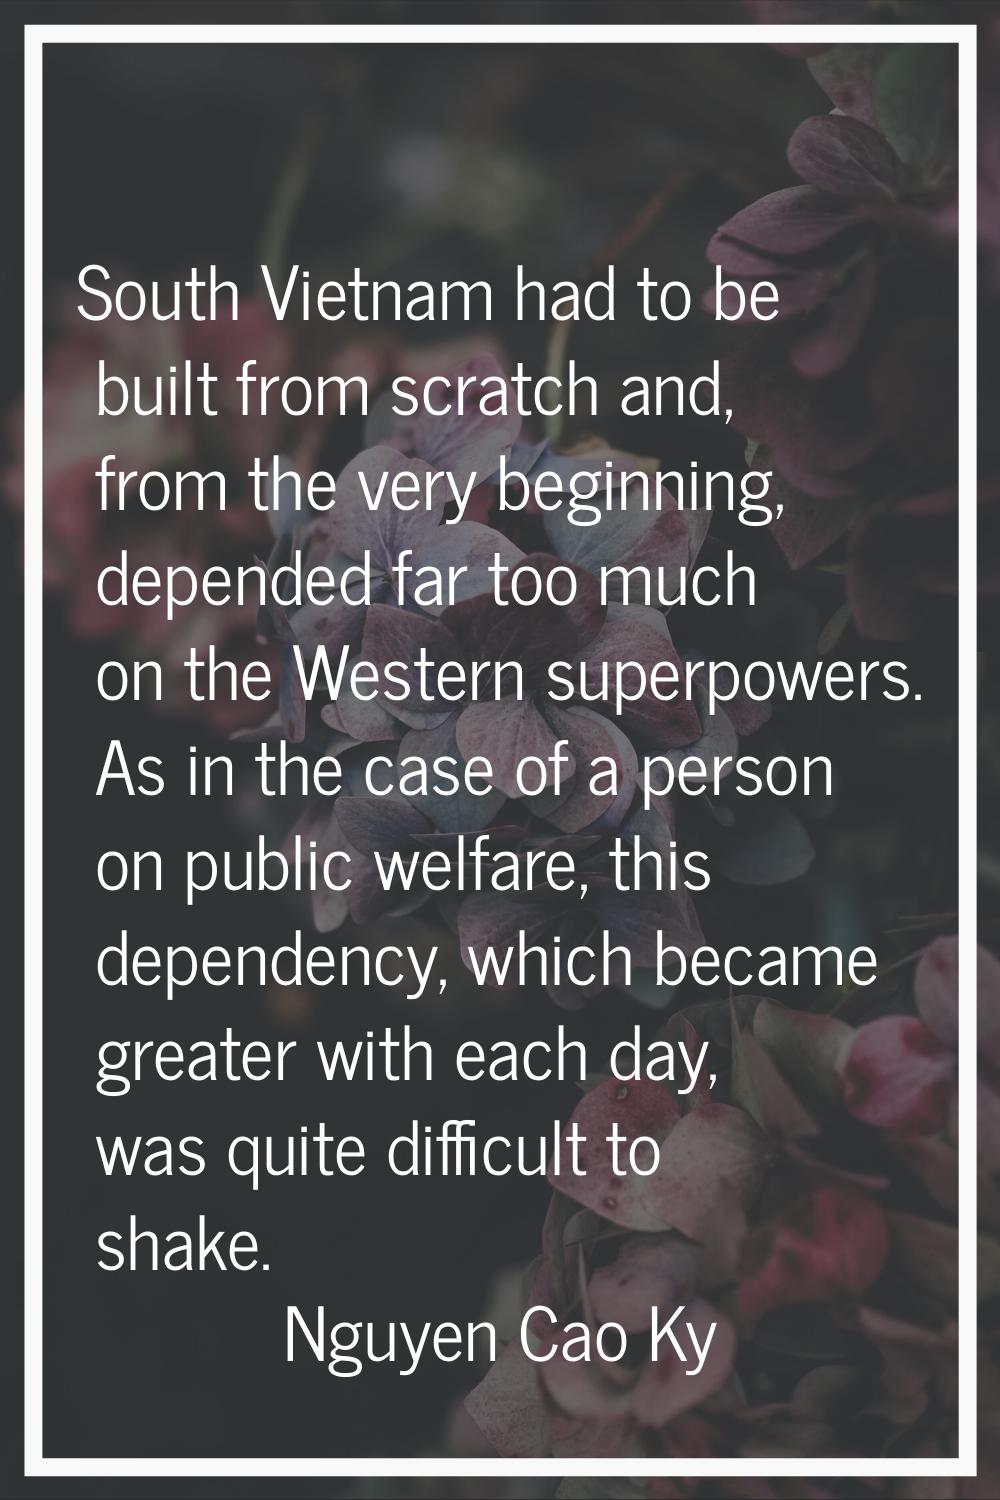 South Vietnam had to be built from scratch and, from the very beginning, depended far too much on t